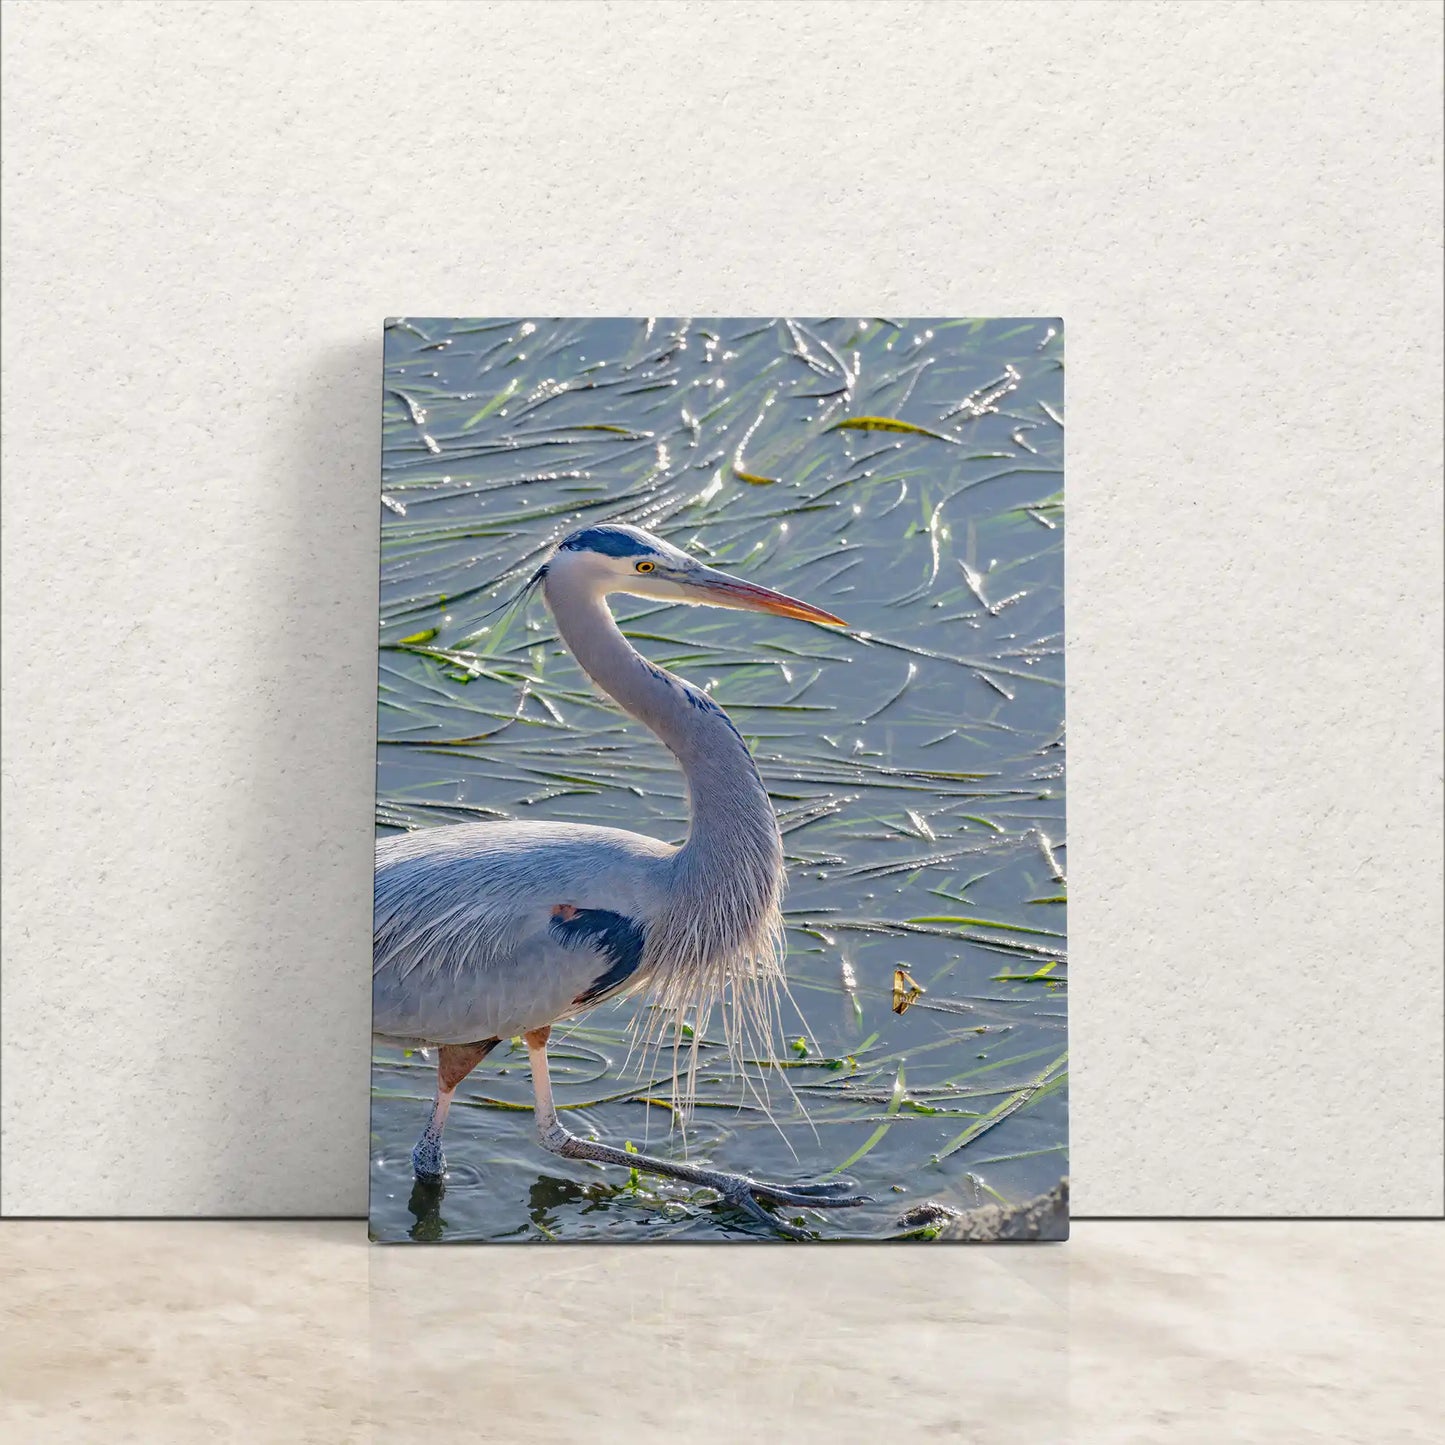 A great blue heron stands in water, depicted on a textured gallery-wrapped canvas with a close-up section detail.